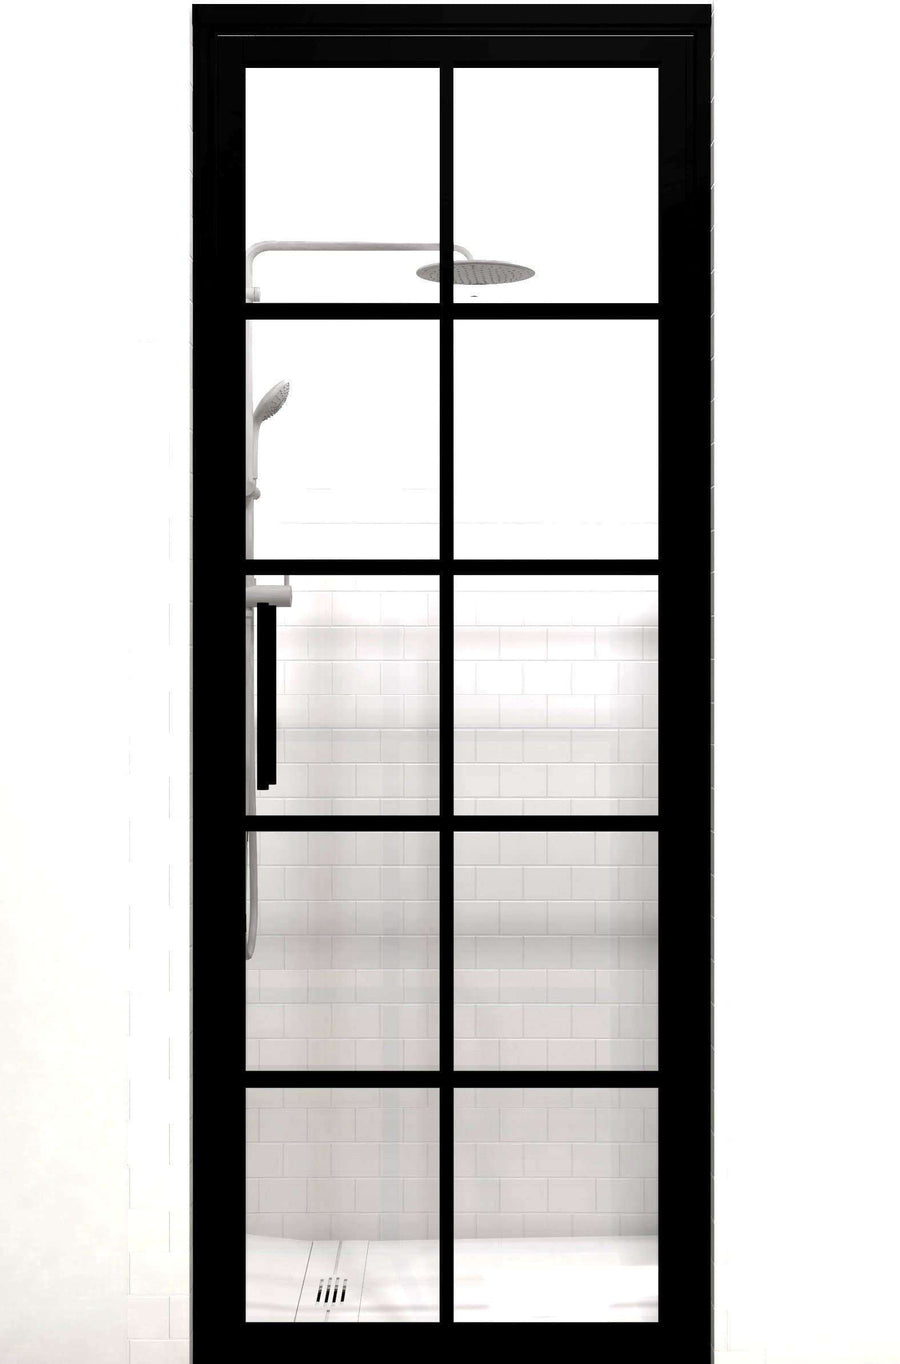 Gridscape Factory Windowpane Hinged Shower Door with Black Metal Frame ...